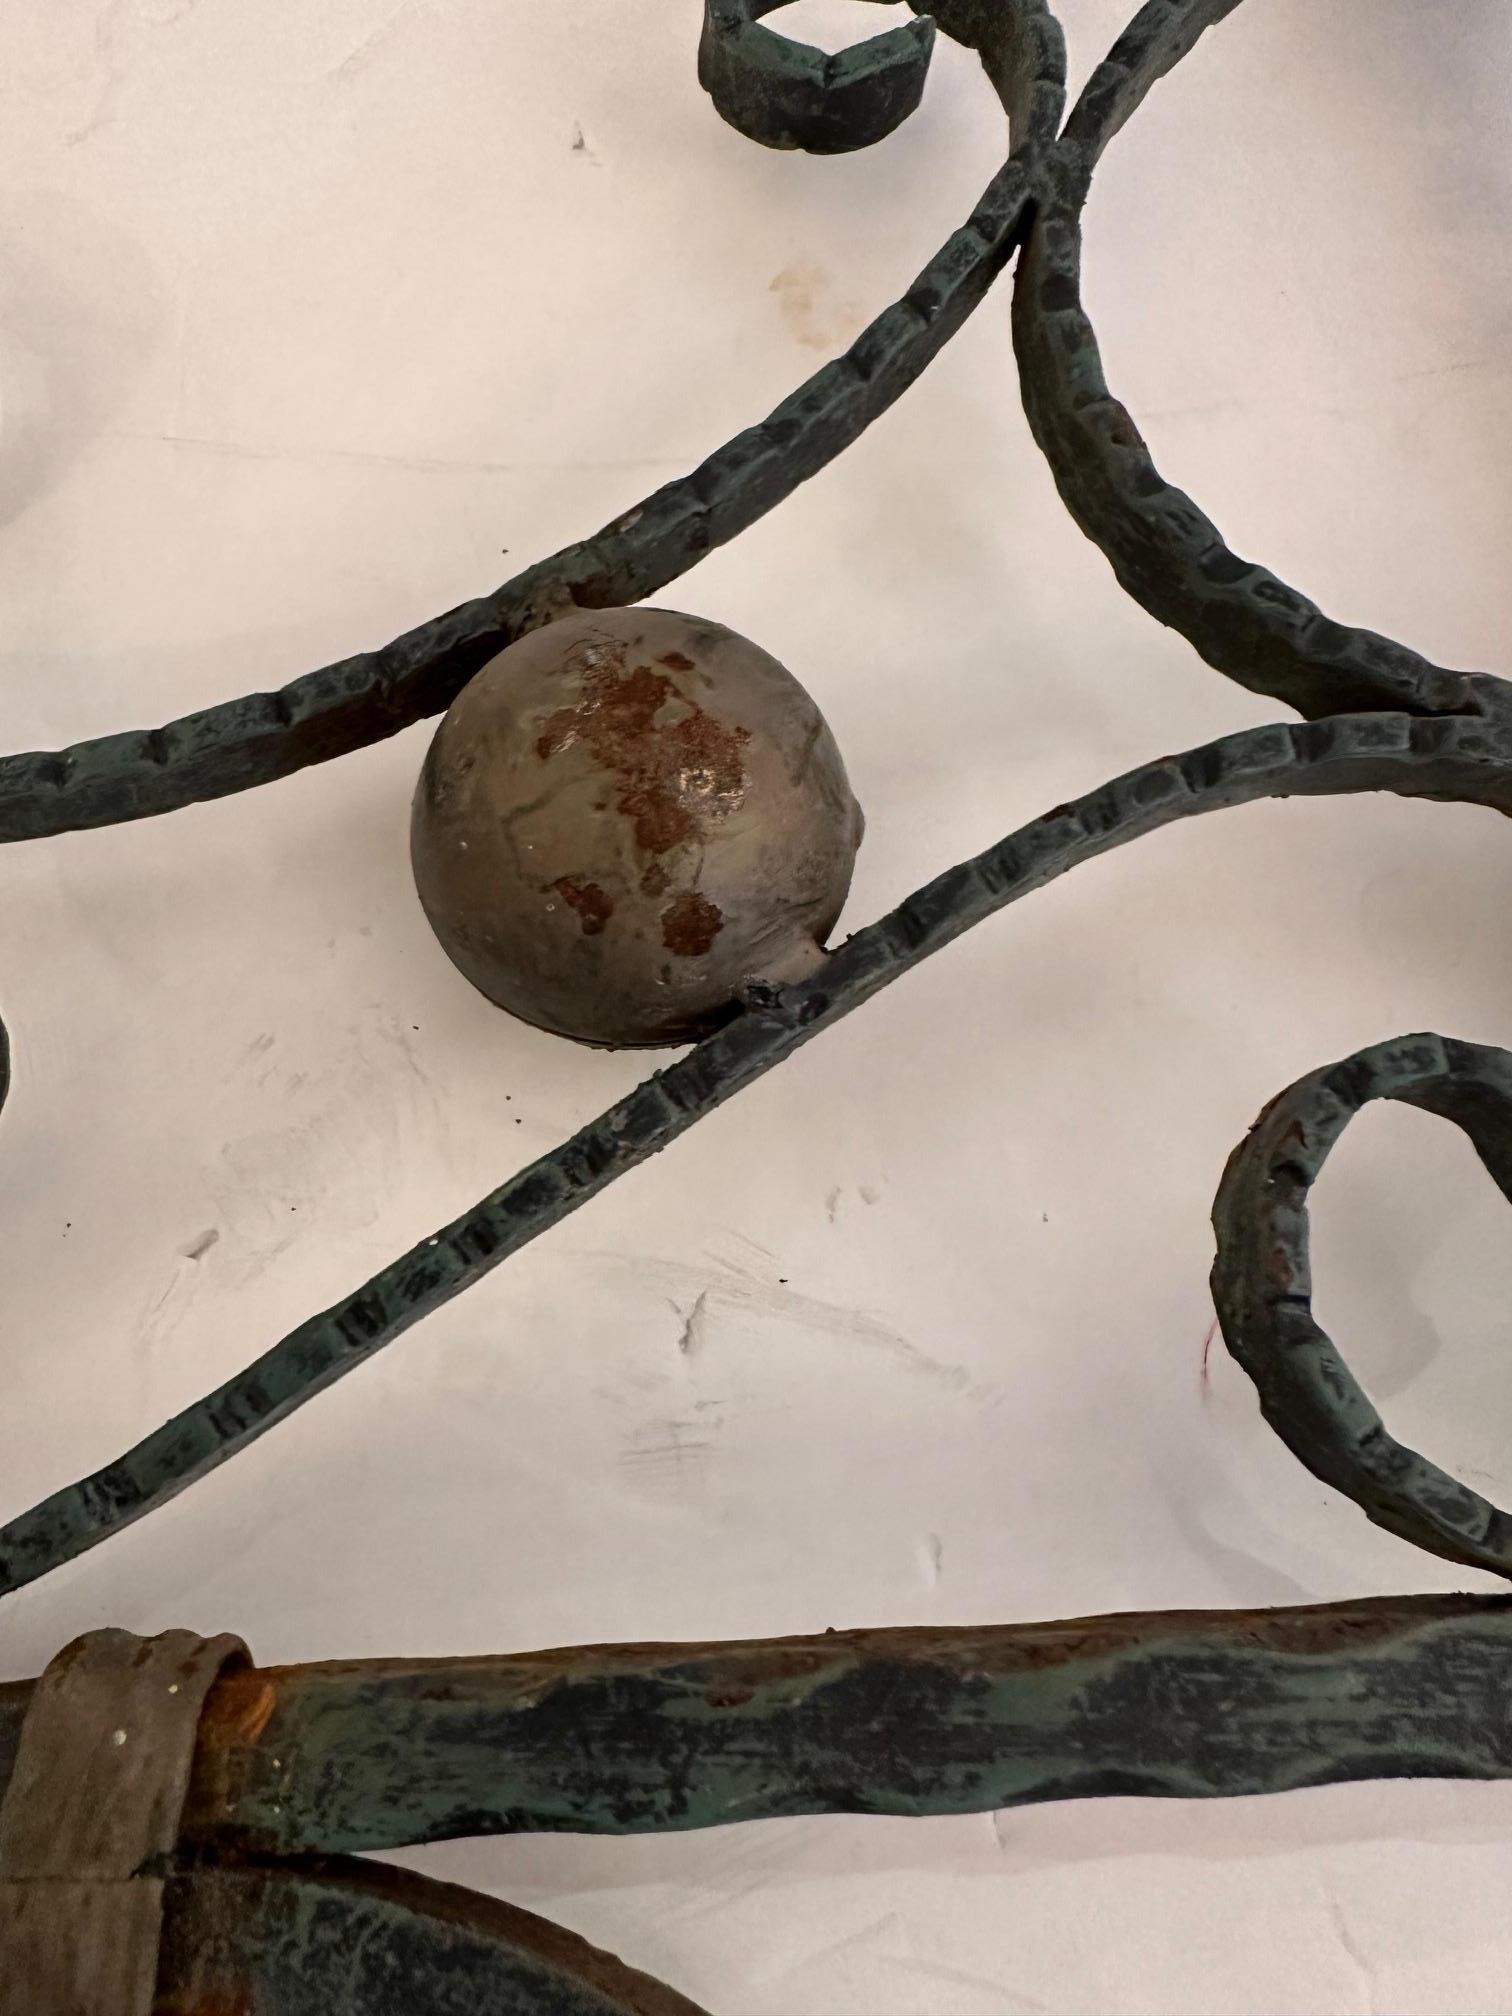 Pair of large ornate eye catching cast iron decorative brackets that make wonderful found object wall art.  Can be hung as protruding brackets or flat on a wall.